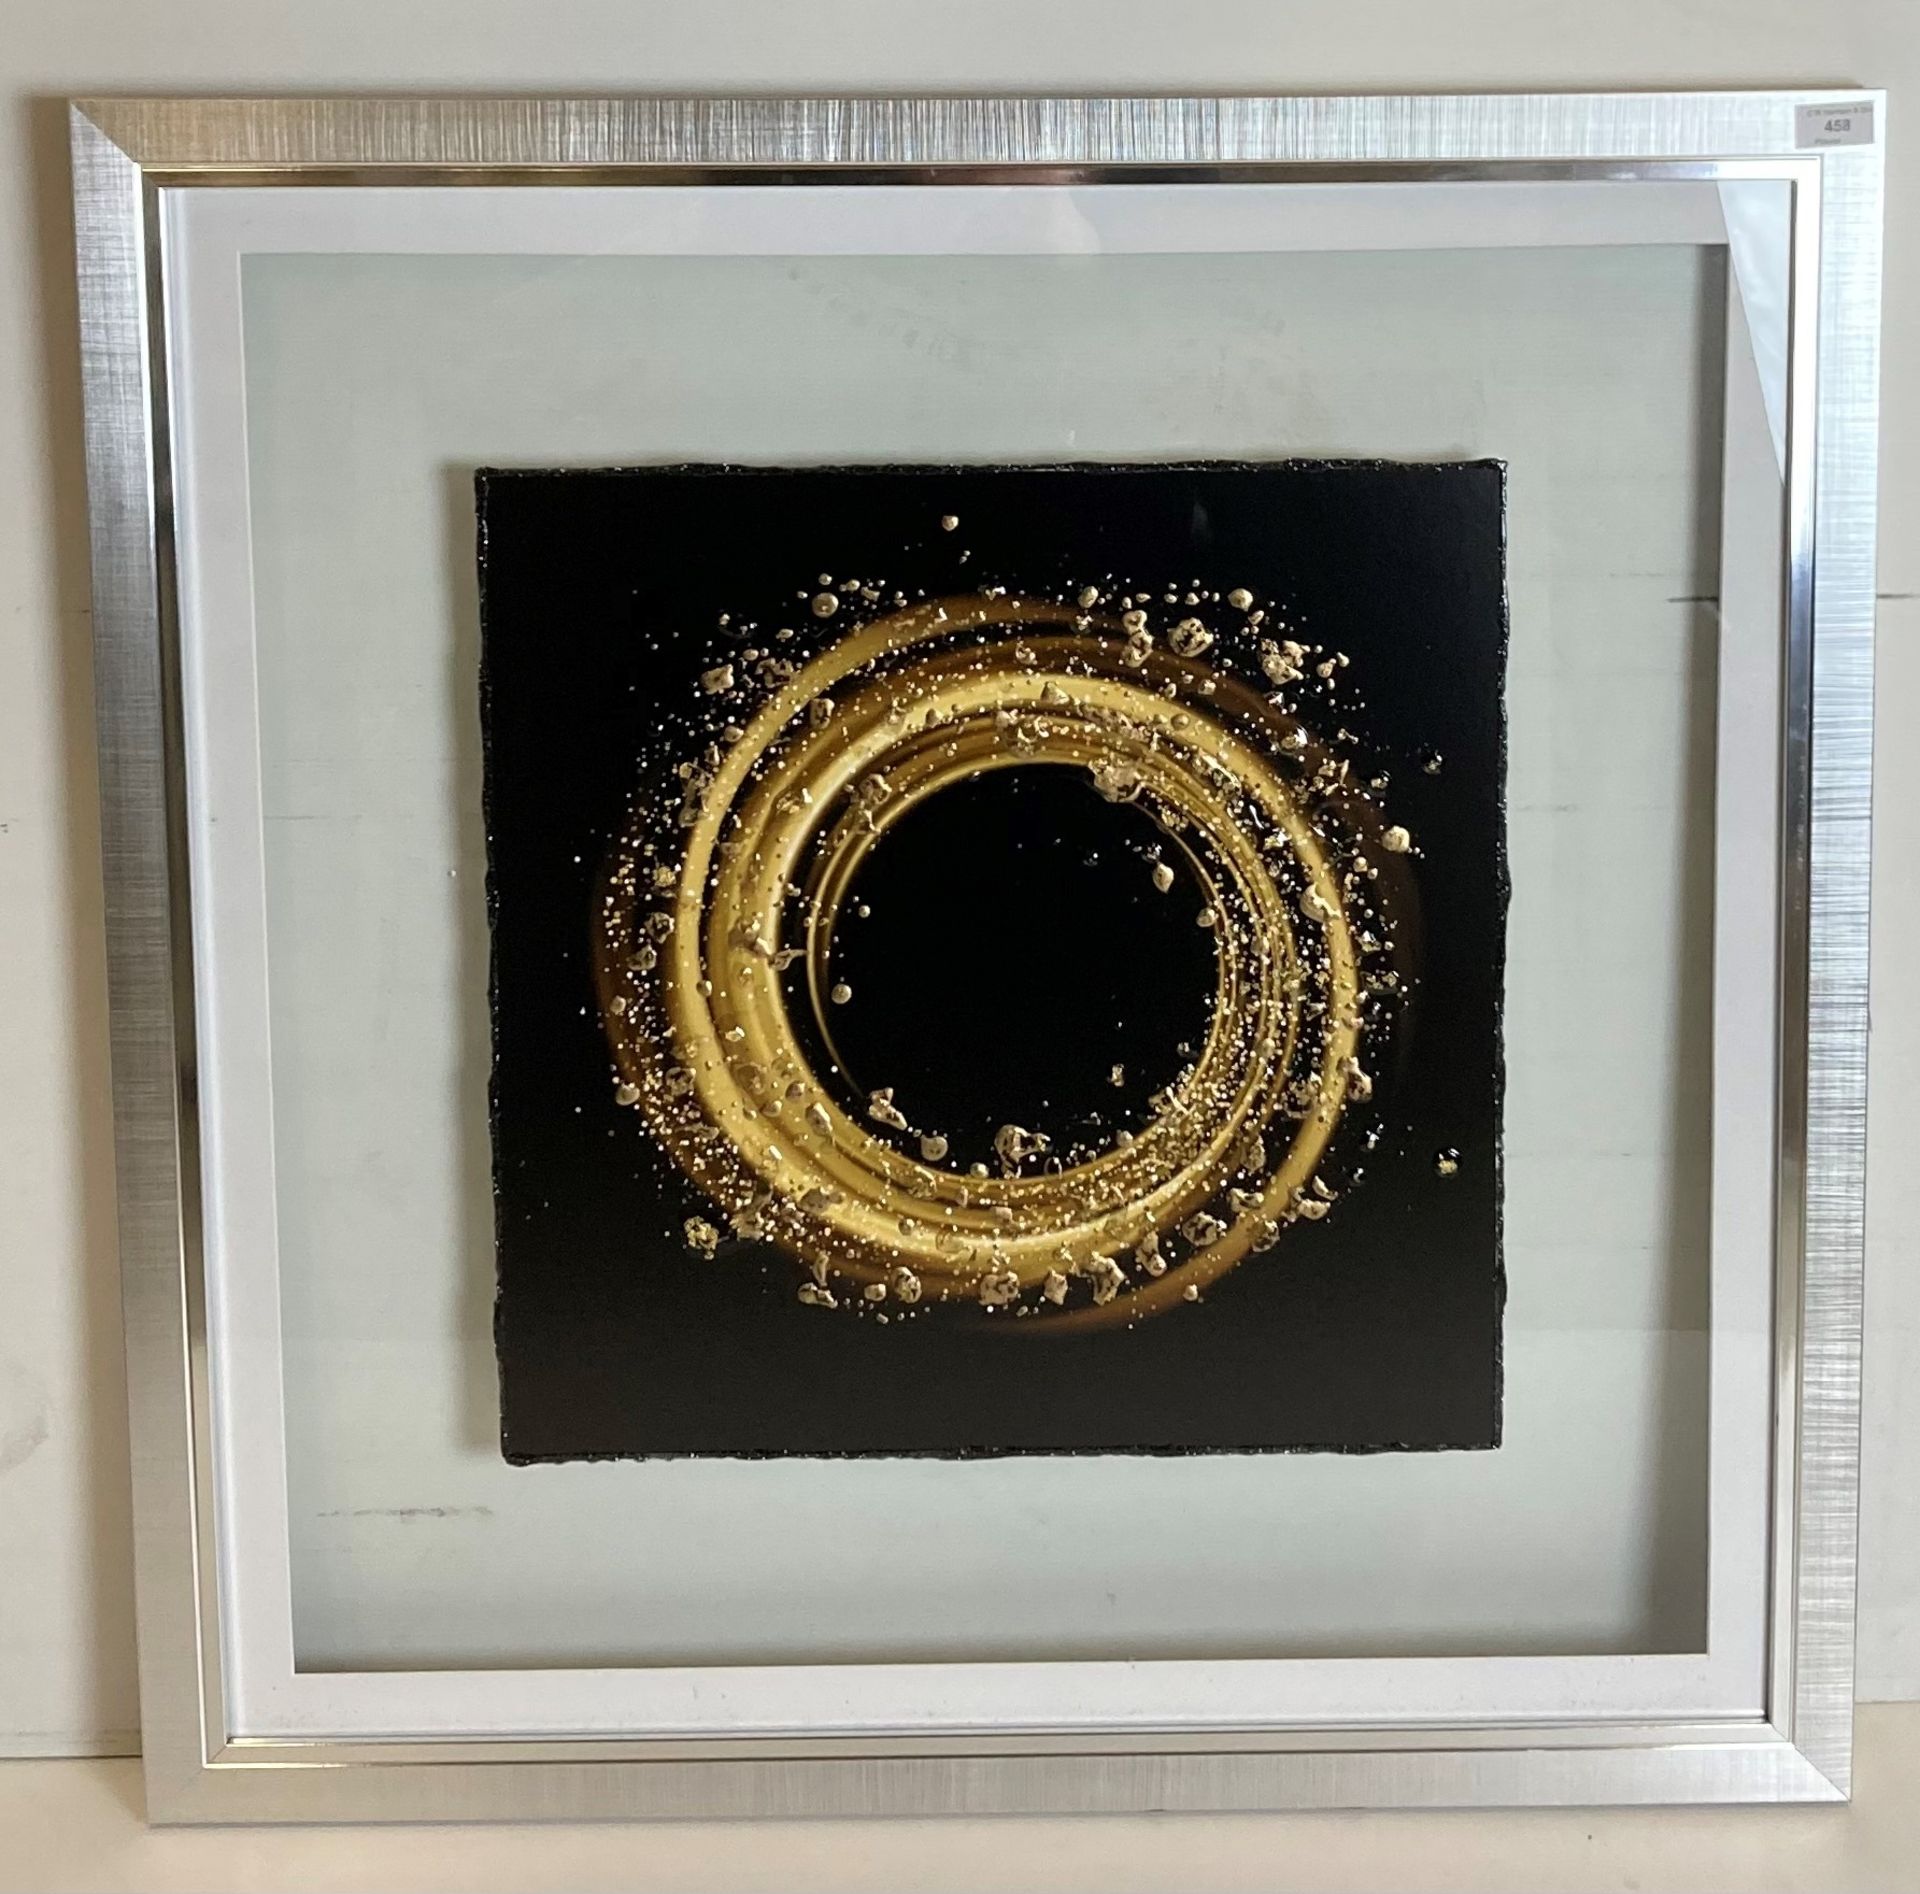 Liquid crystal circular artwork 'Solid Stardust' in chrome surrounded by glass frame, - Image 2 of 2